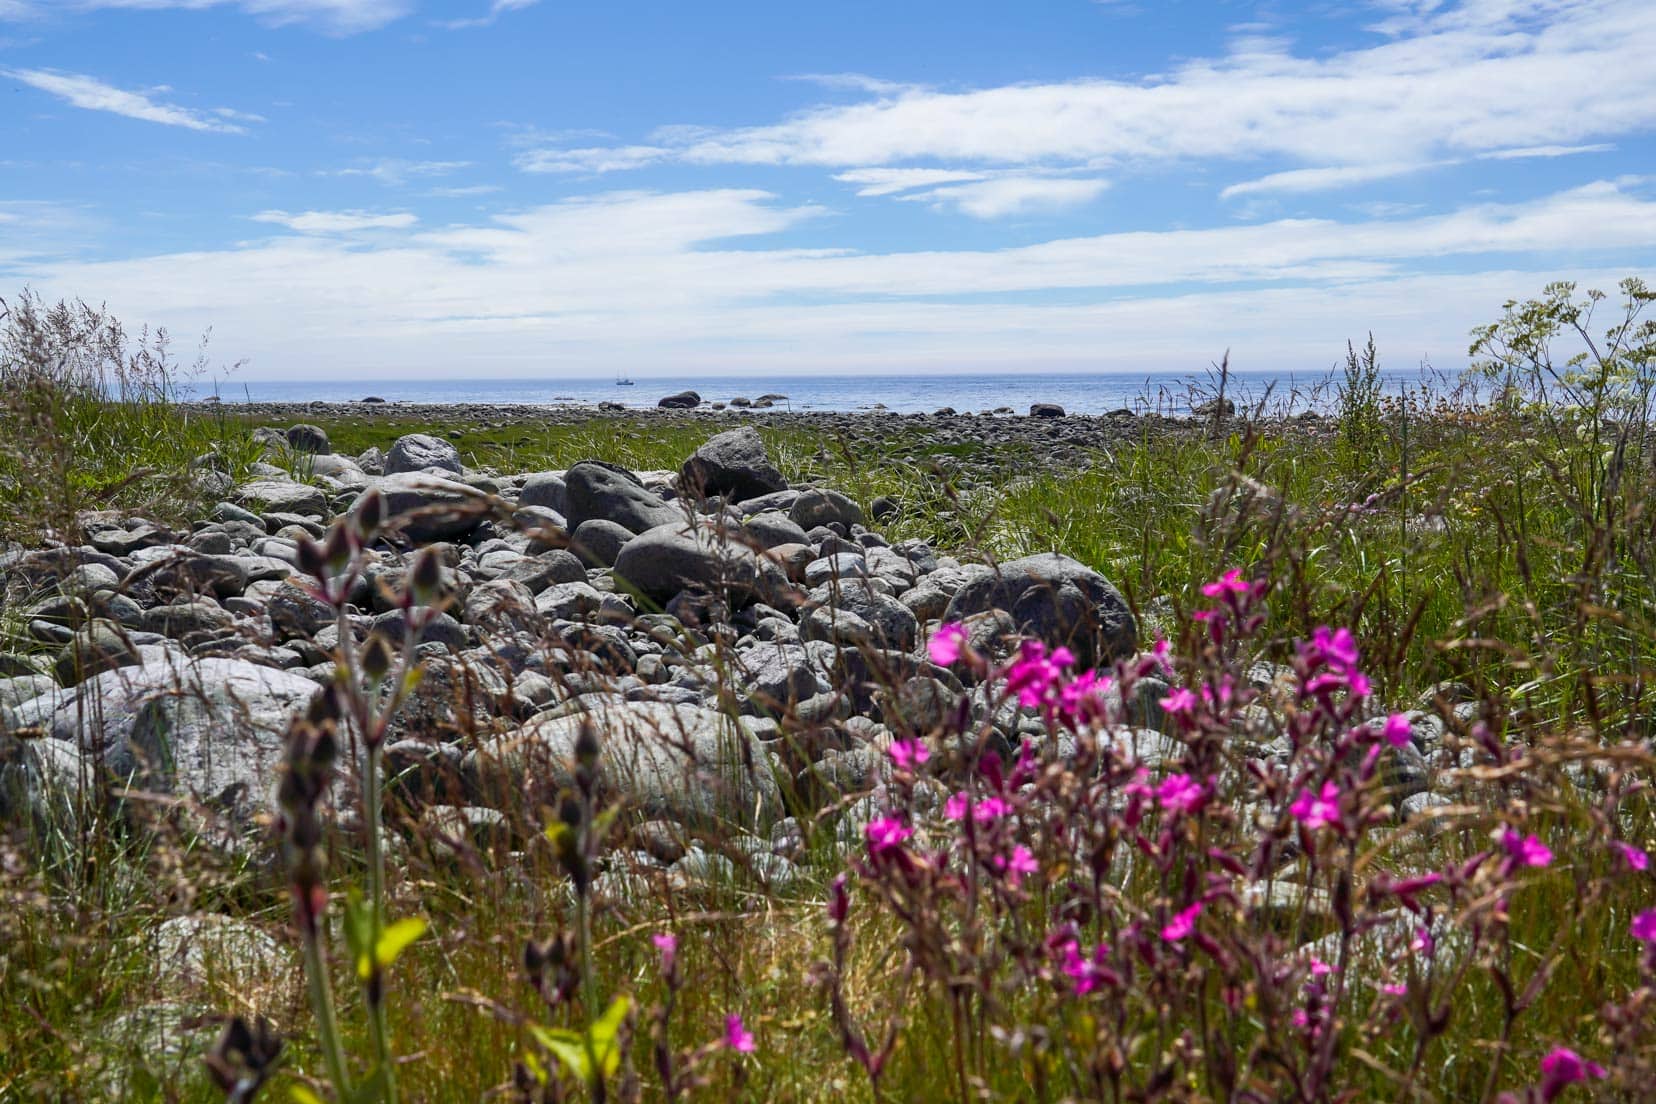 Views along the Kongvegen ocean in the background with a foreground of granite rock and purple and yellow wildflowers